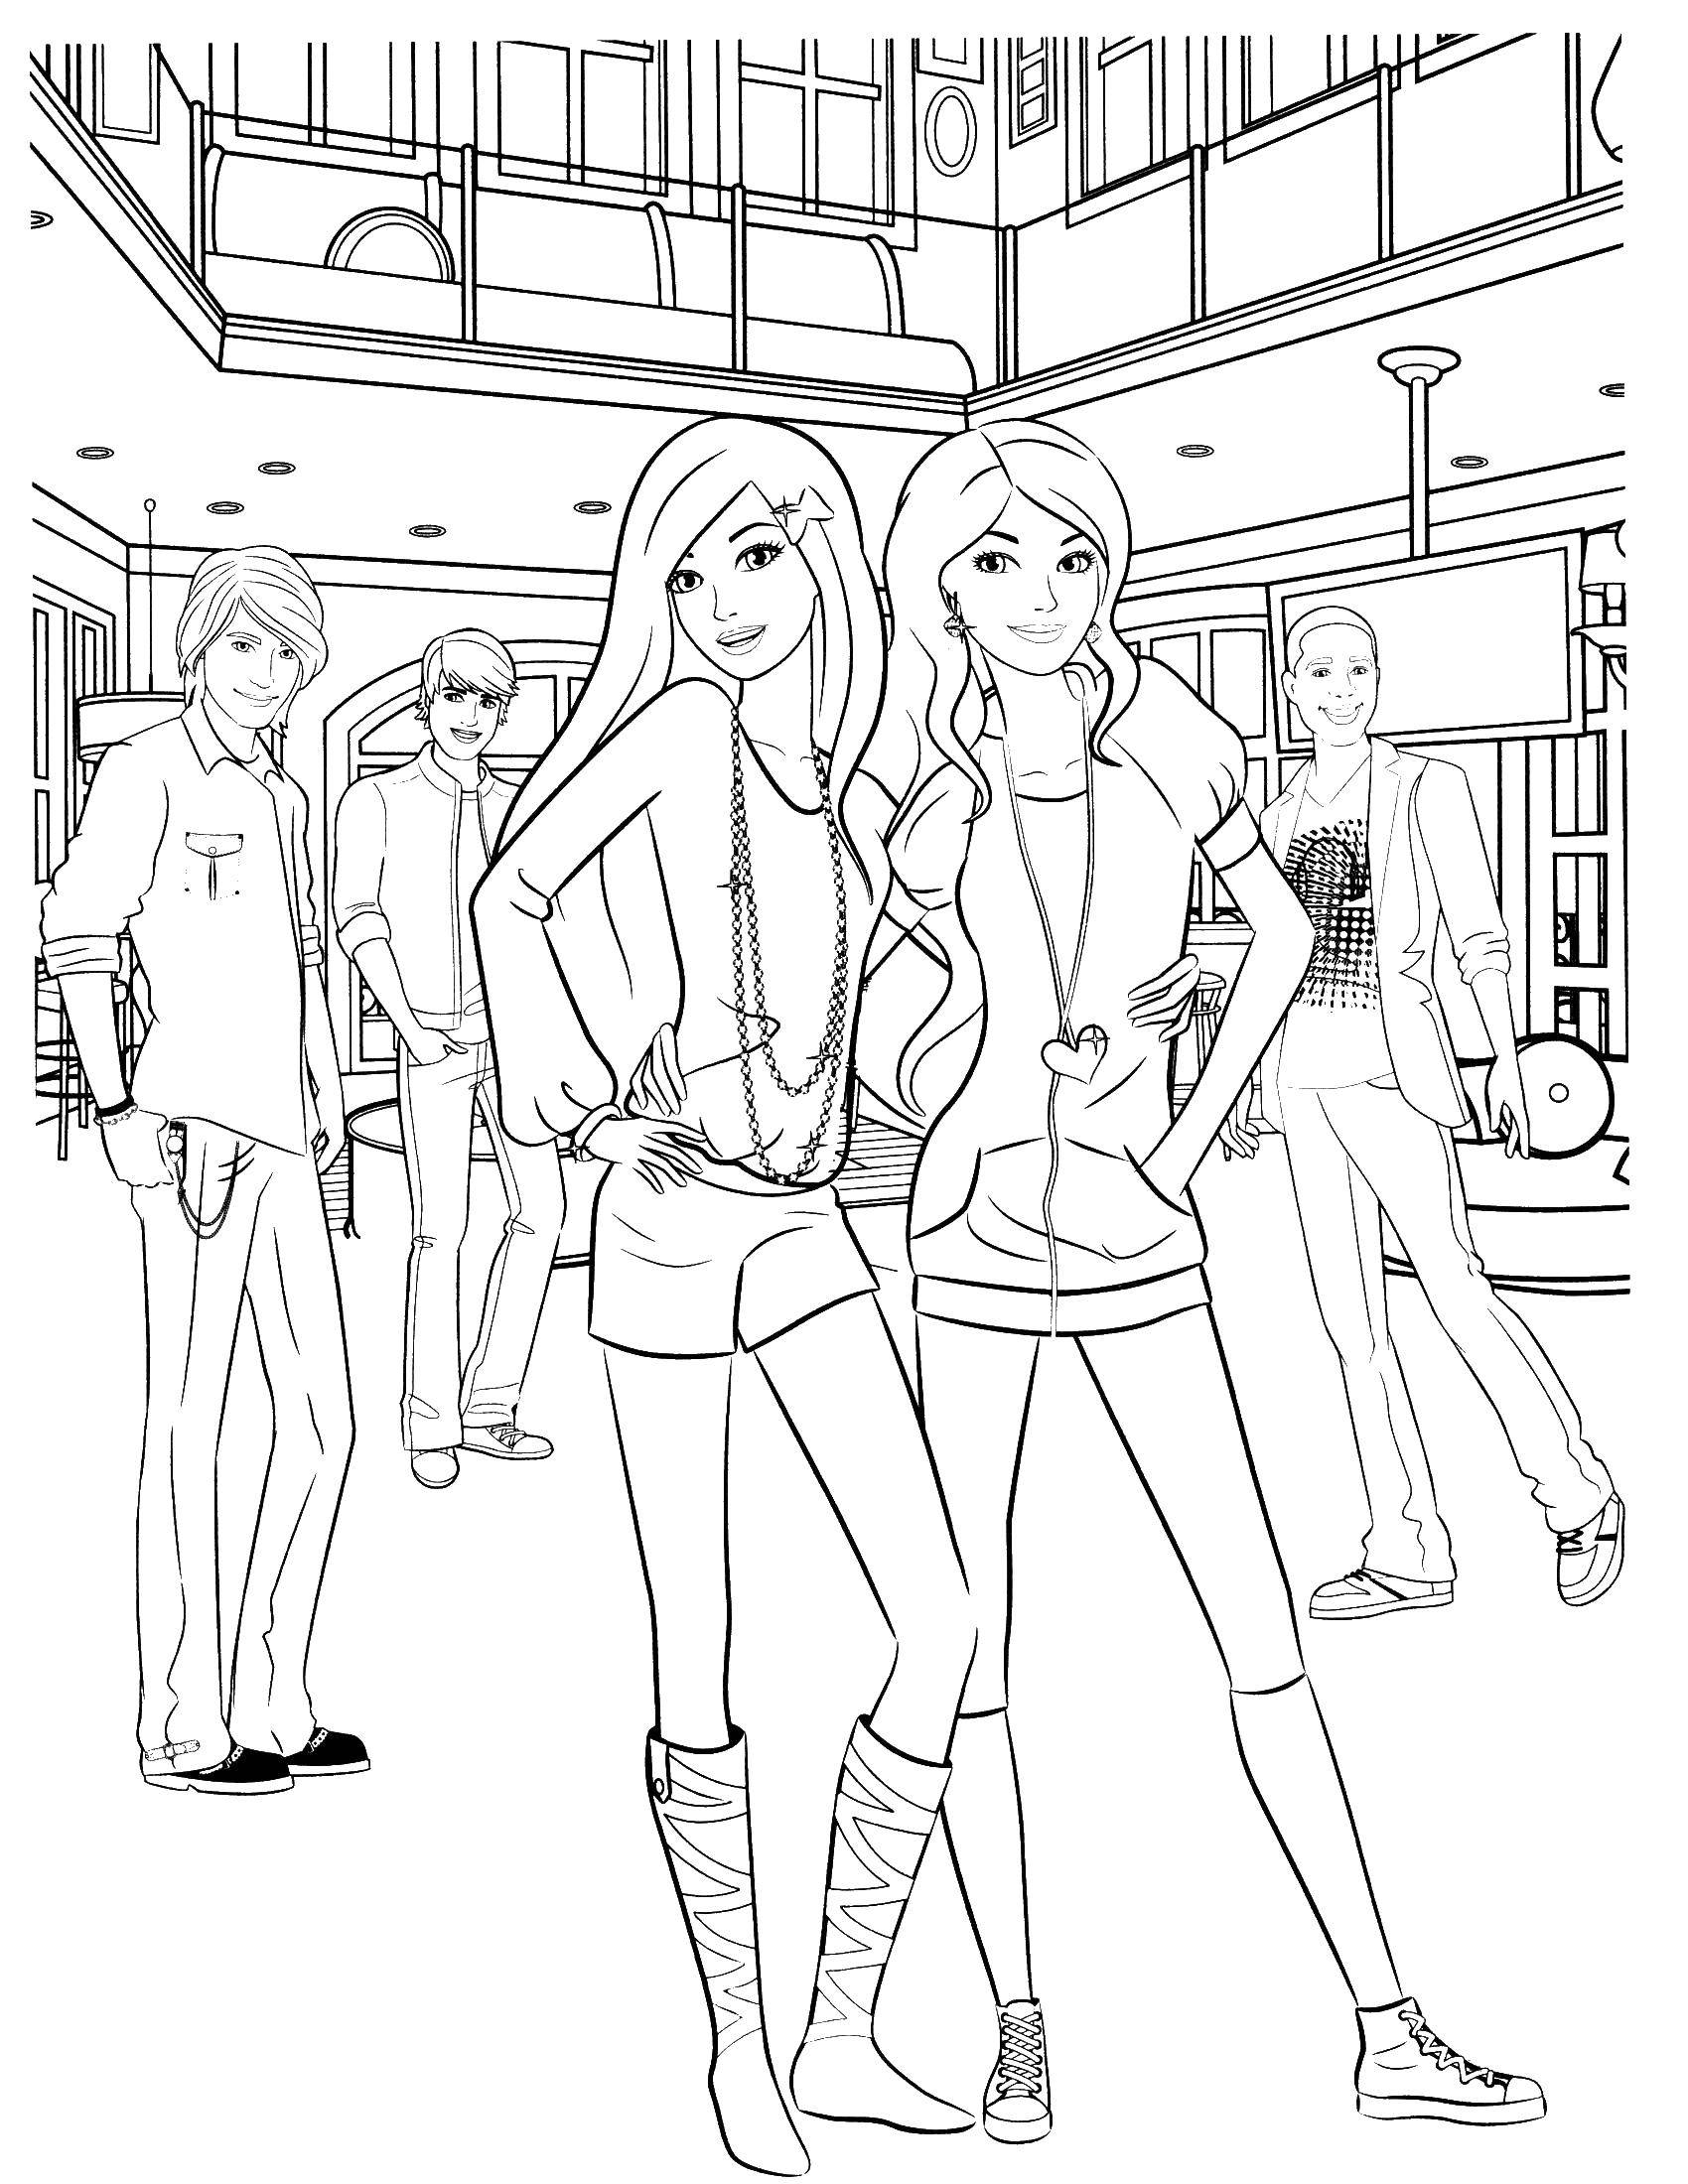 Coloring Barbie and her friends. Category ladies. Tags:  Barbie , model.